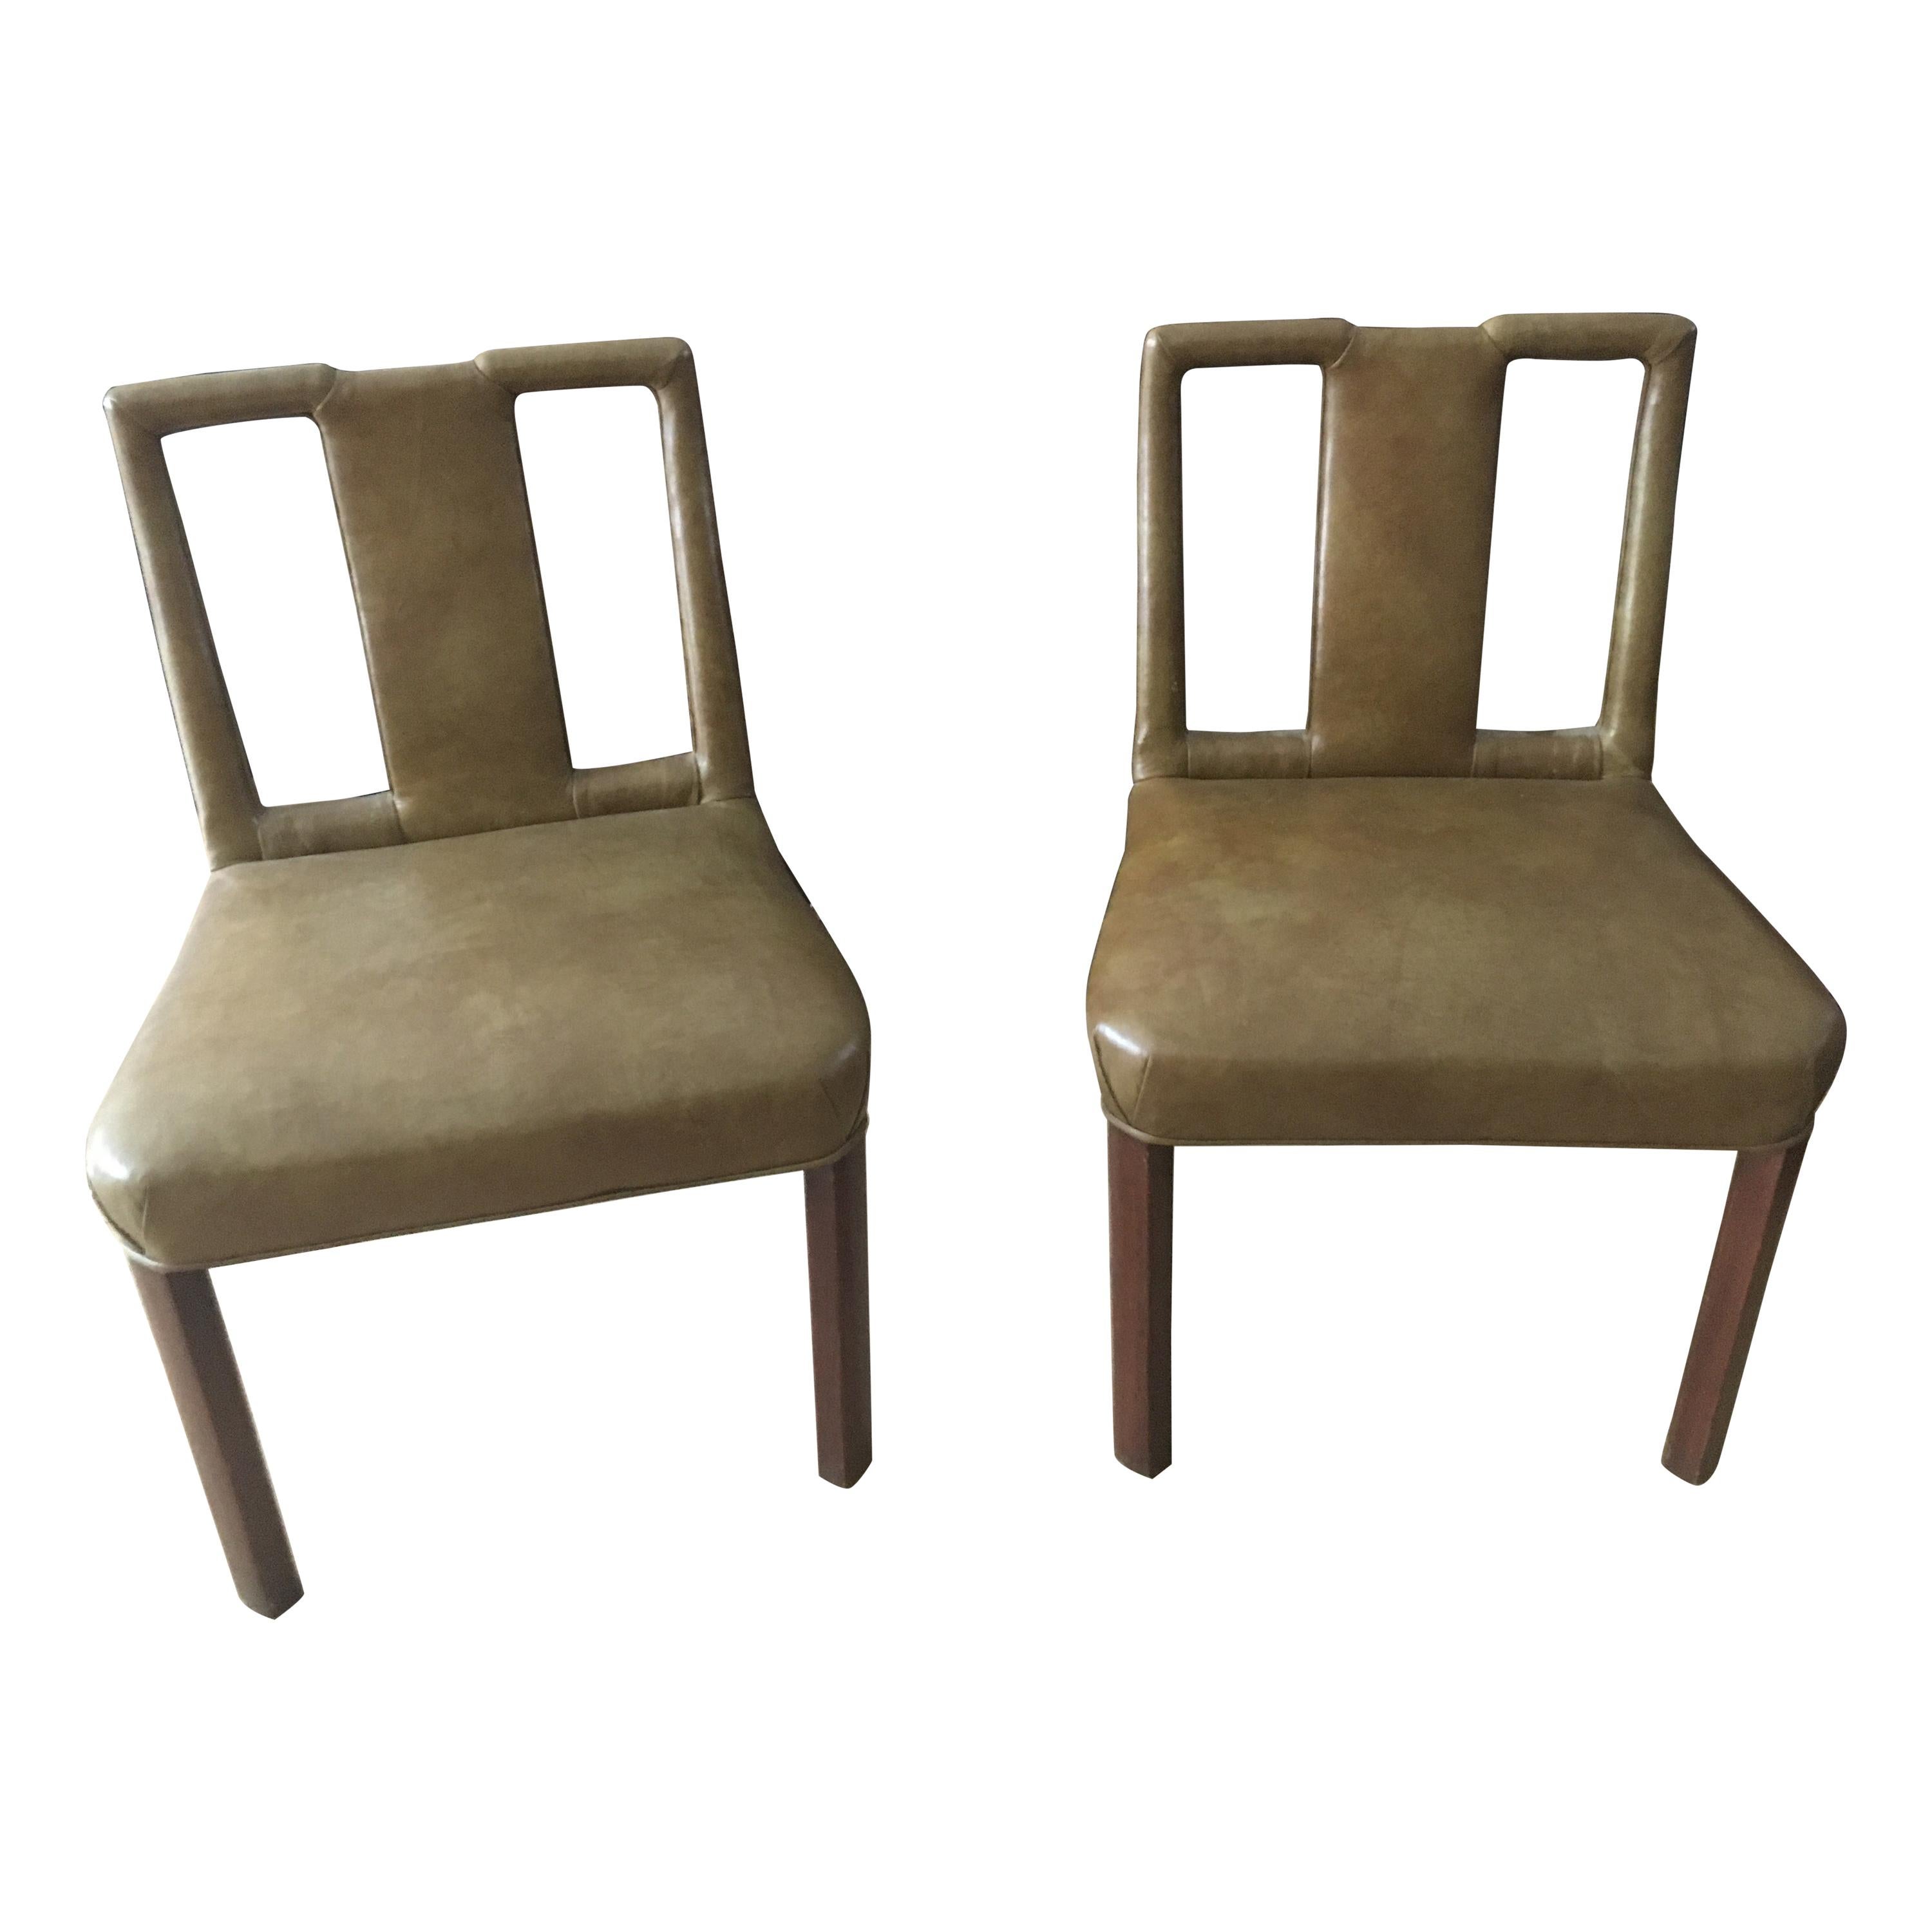 Set of Four Midcentury Games Chairs in the Style of Dorthy Draper/Billy Hanes